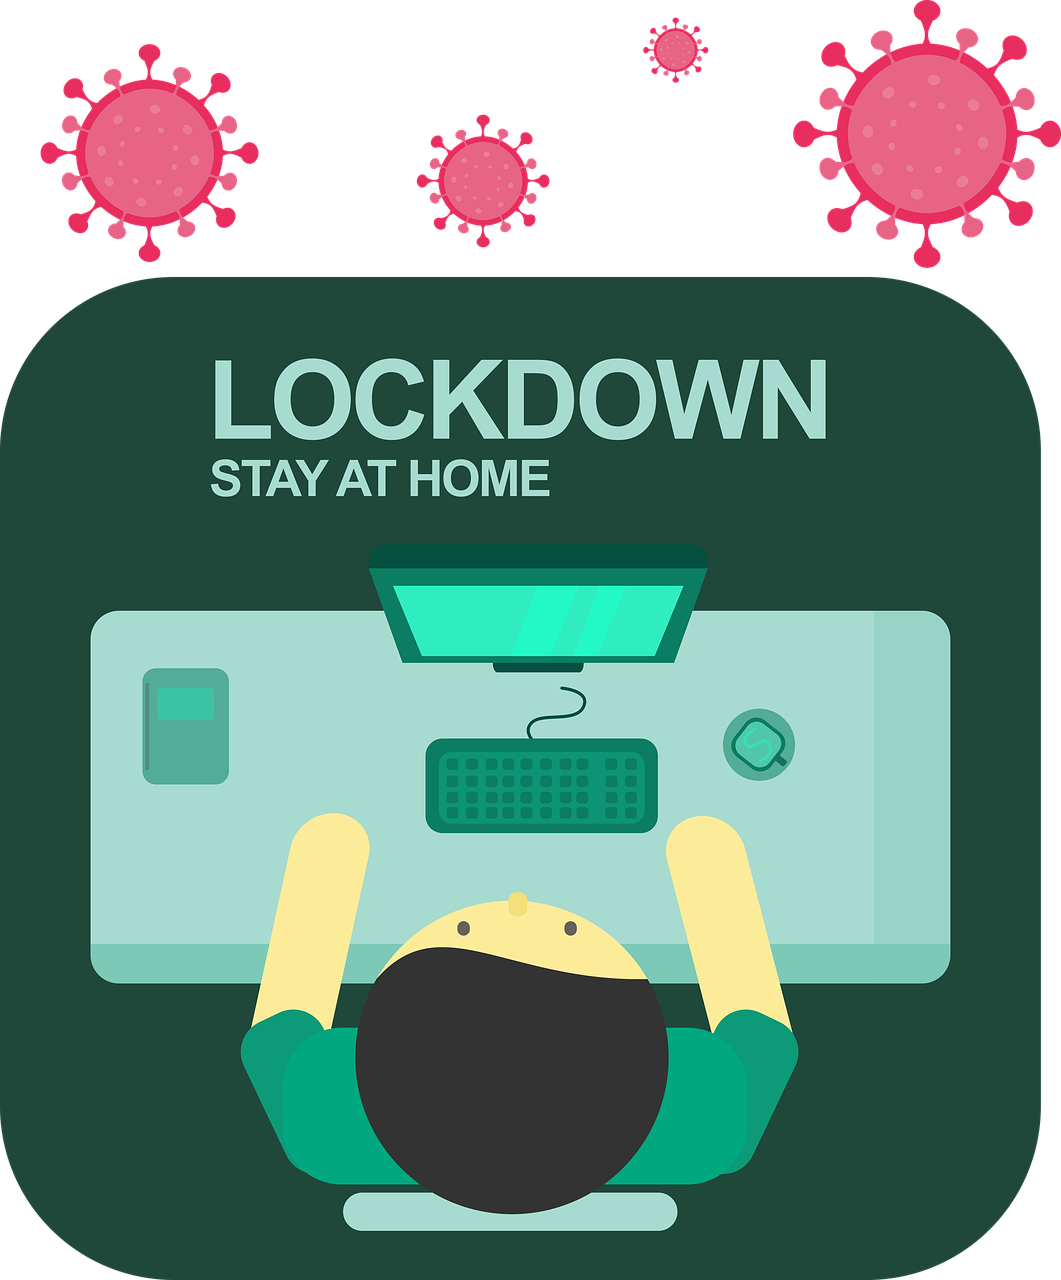 lockdown, stay at home, stay home